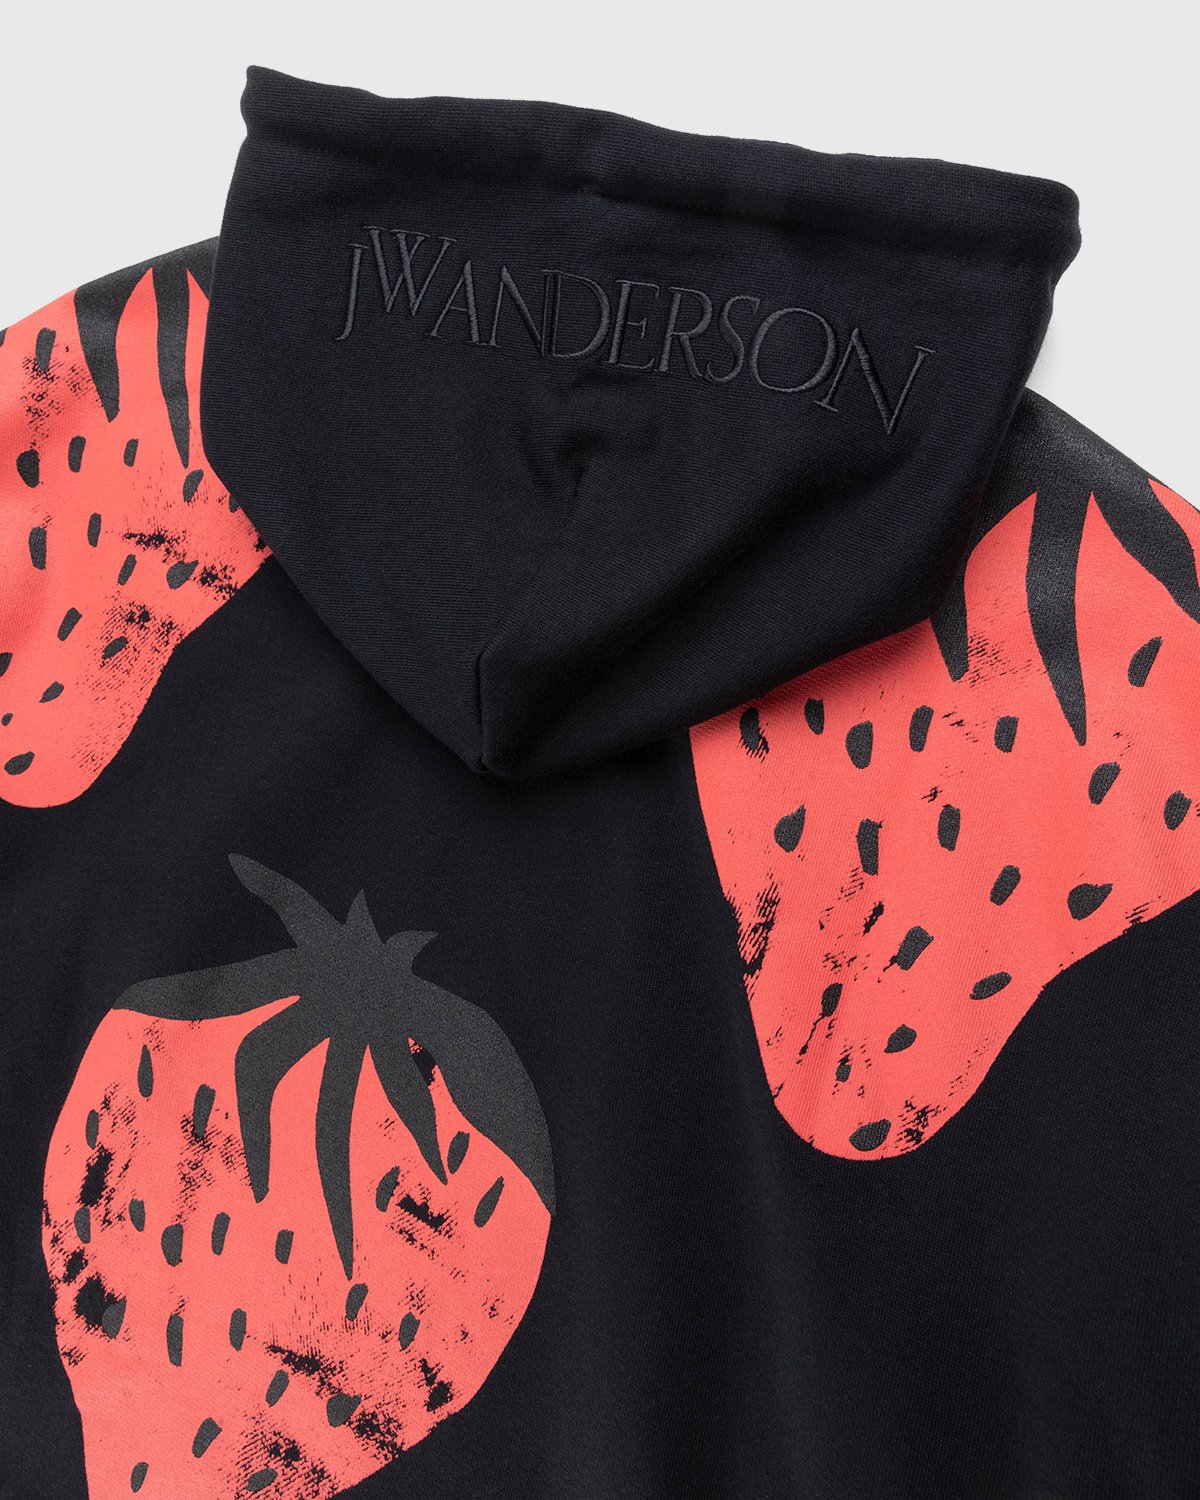 J.W. Anderson - Oversized Strawberry Hoodie Black/Red - Clothing - Black - Image 4